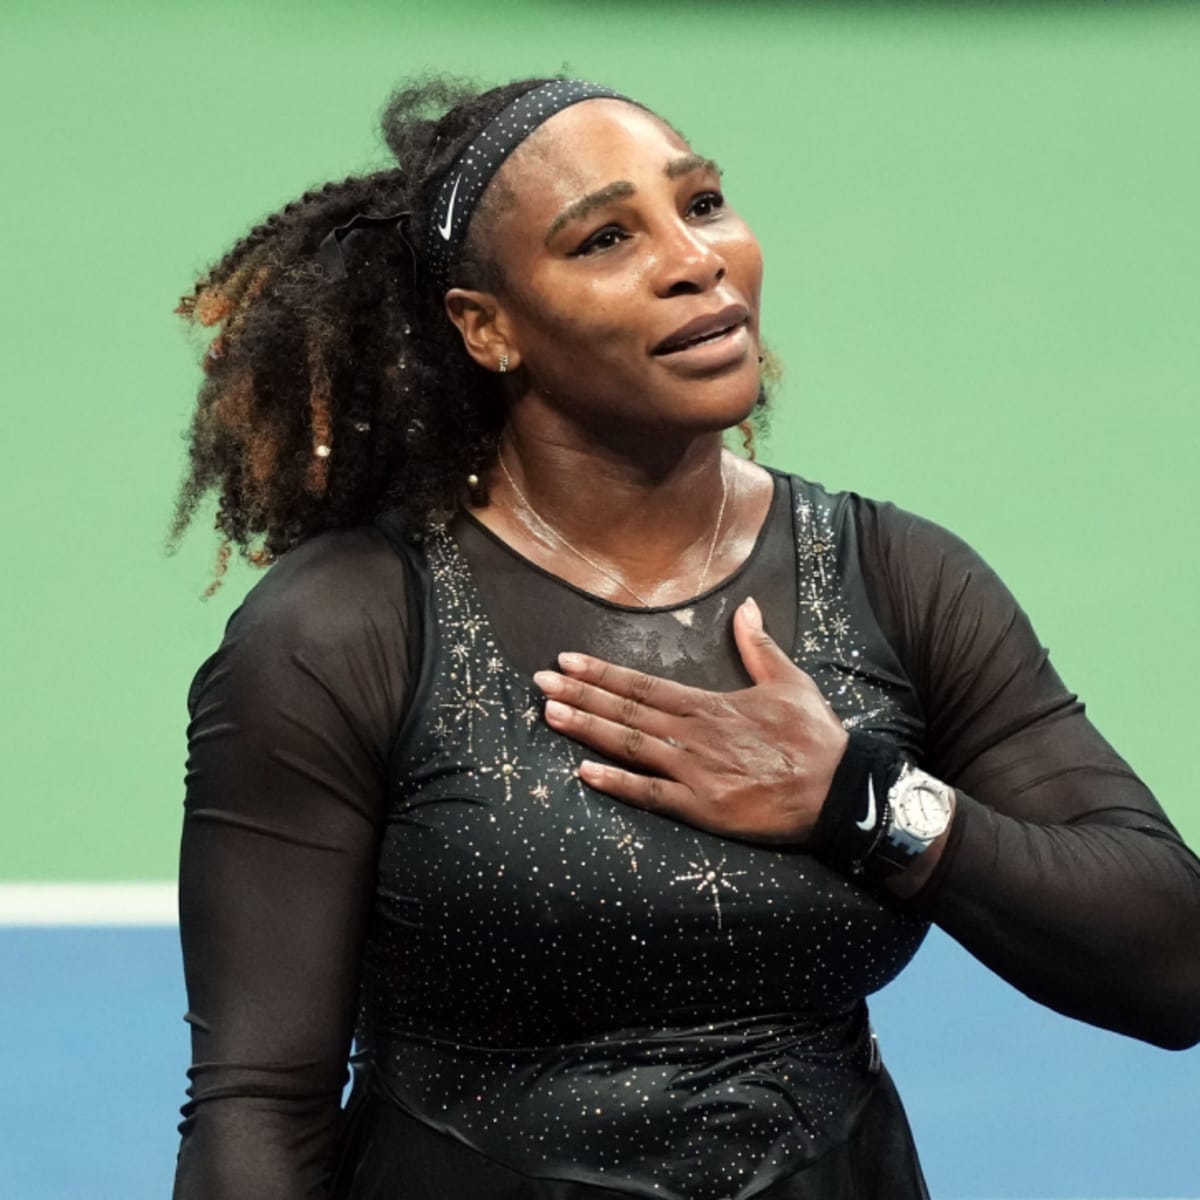 Who did Serena Williams defeat in the final of the 2017 Australian Open to win her 23rd Grand Slam singles title?